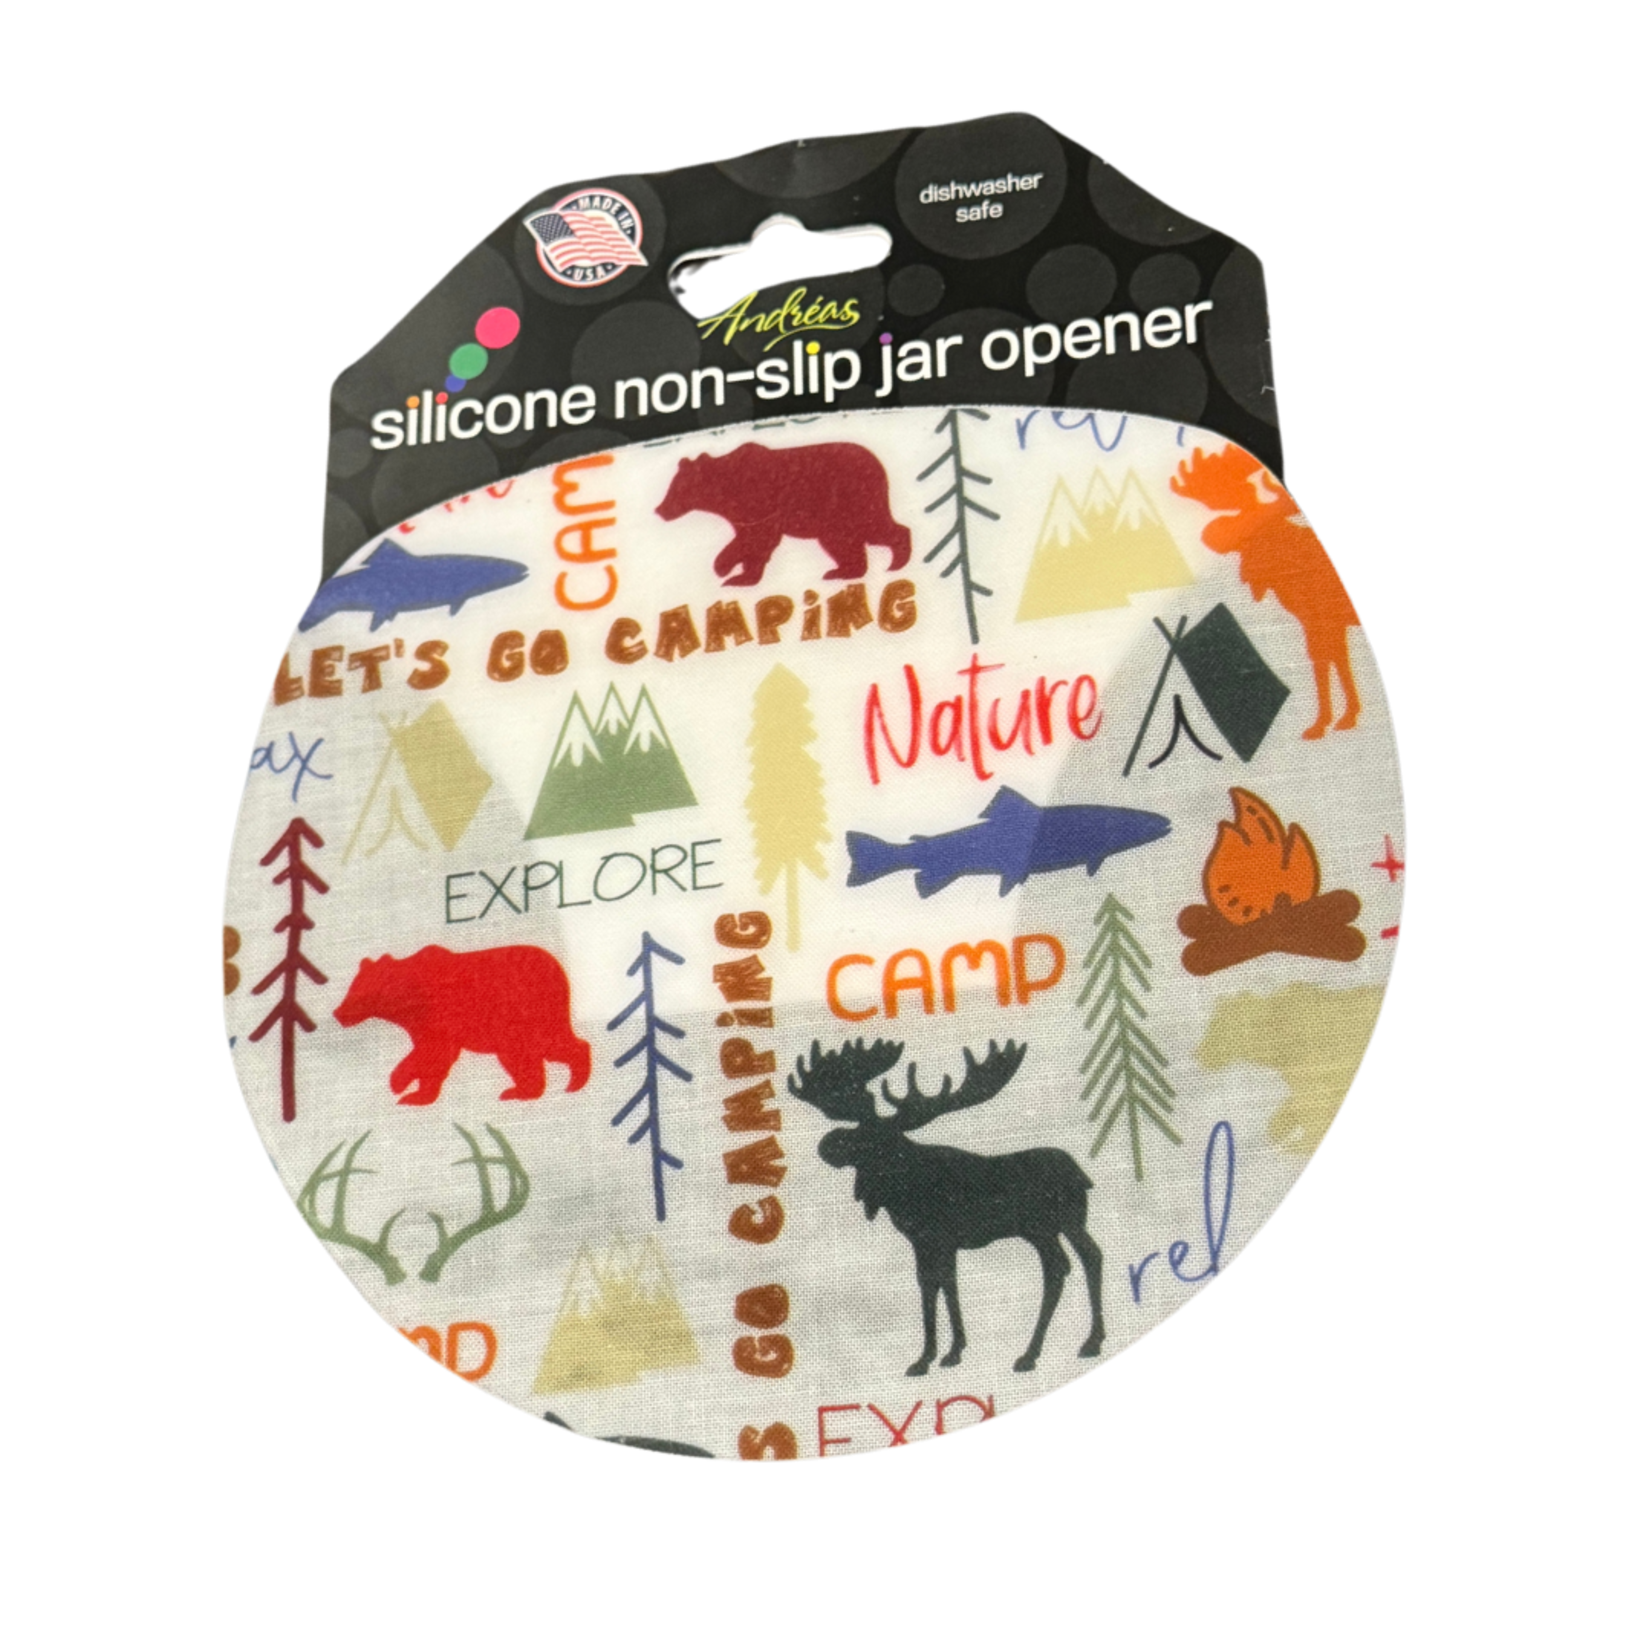 Andrea's Silicone Trivets Jar Opener, Wilderness